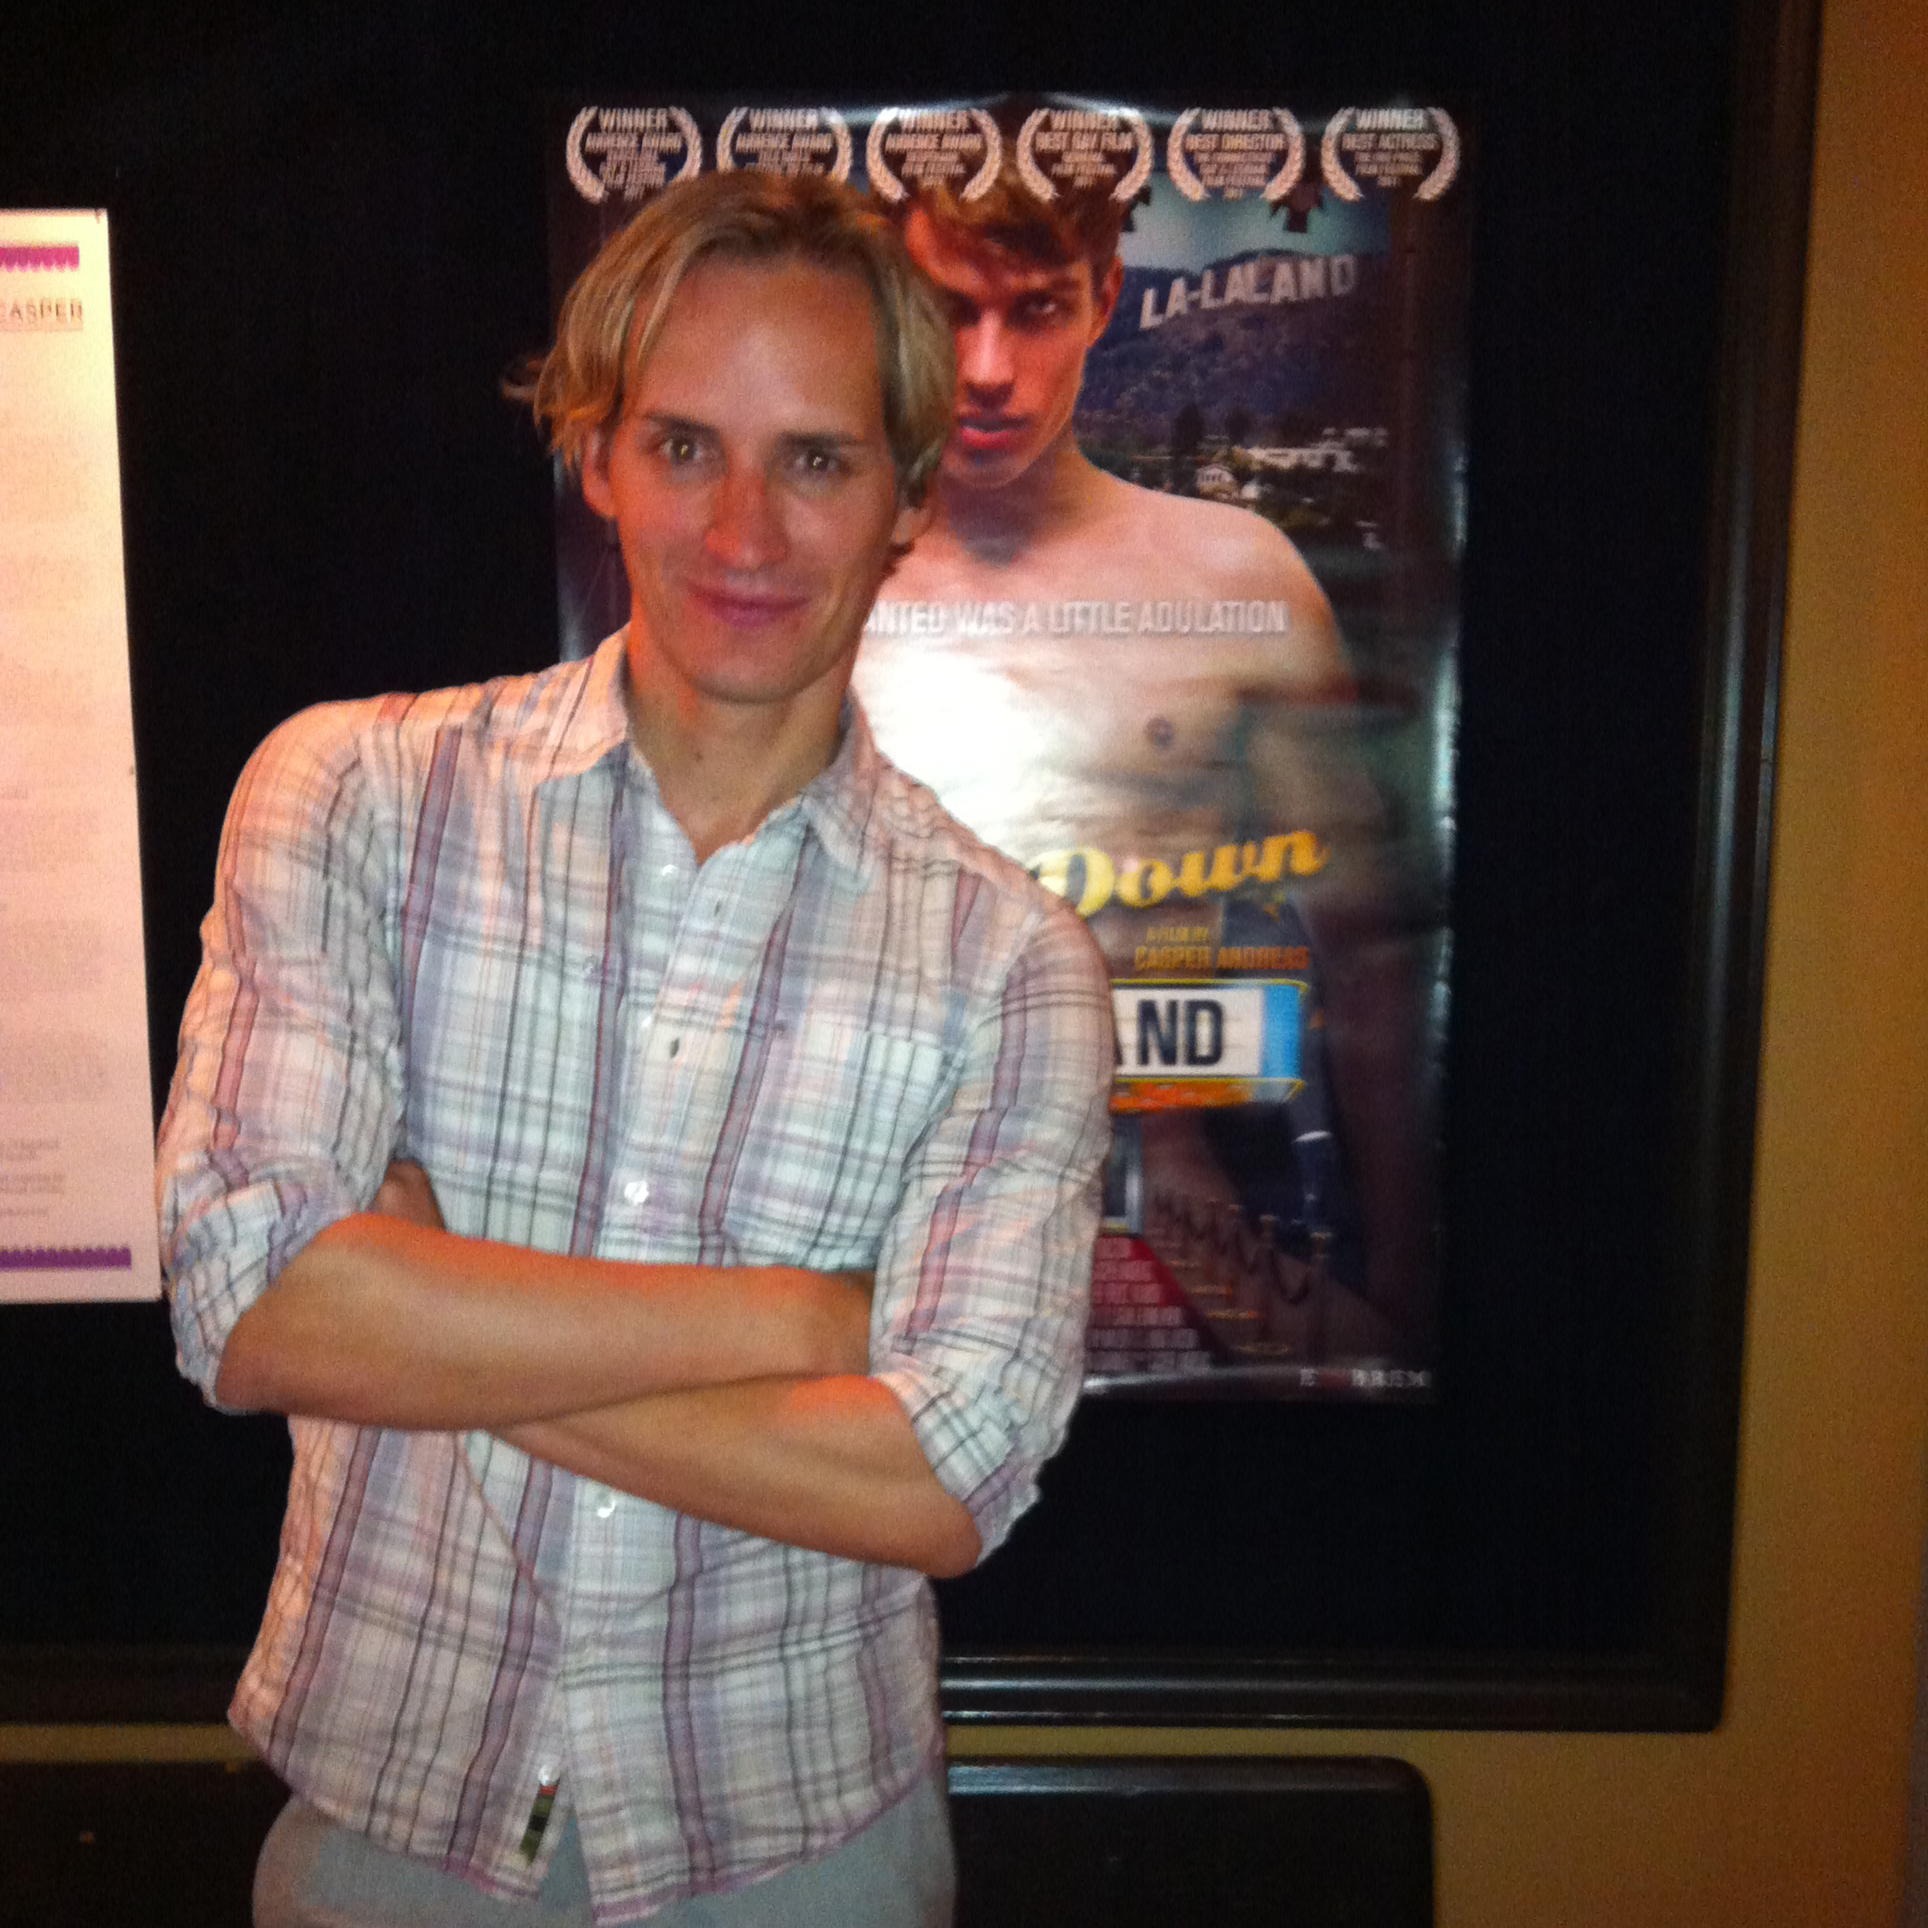 Director Casper Andreas at the opening of GOING DOWN IN LA-LA LAND at Biograf Zita in Stockholm, Sweden, August 2012.